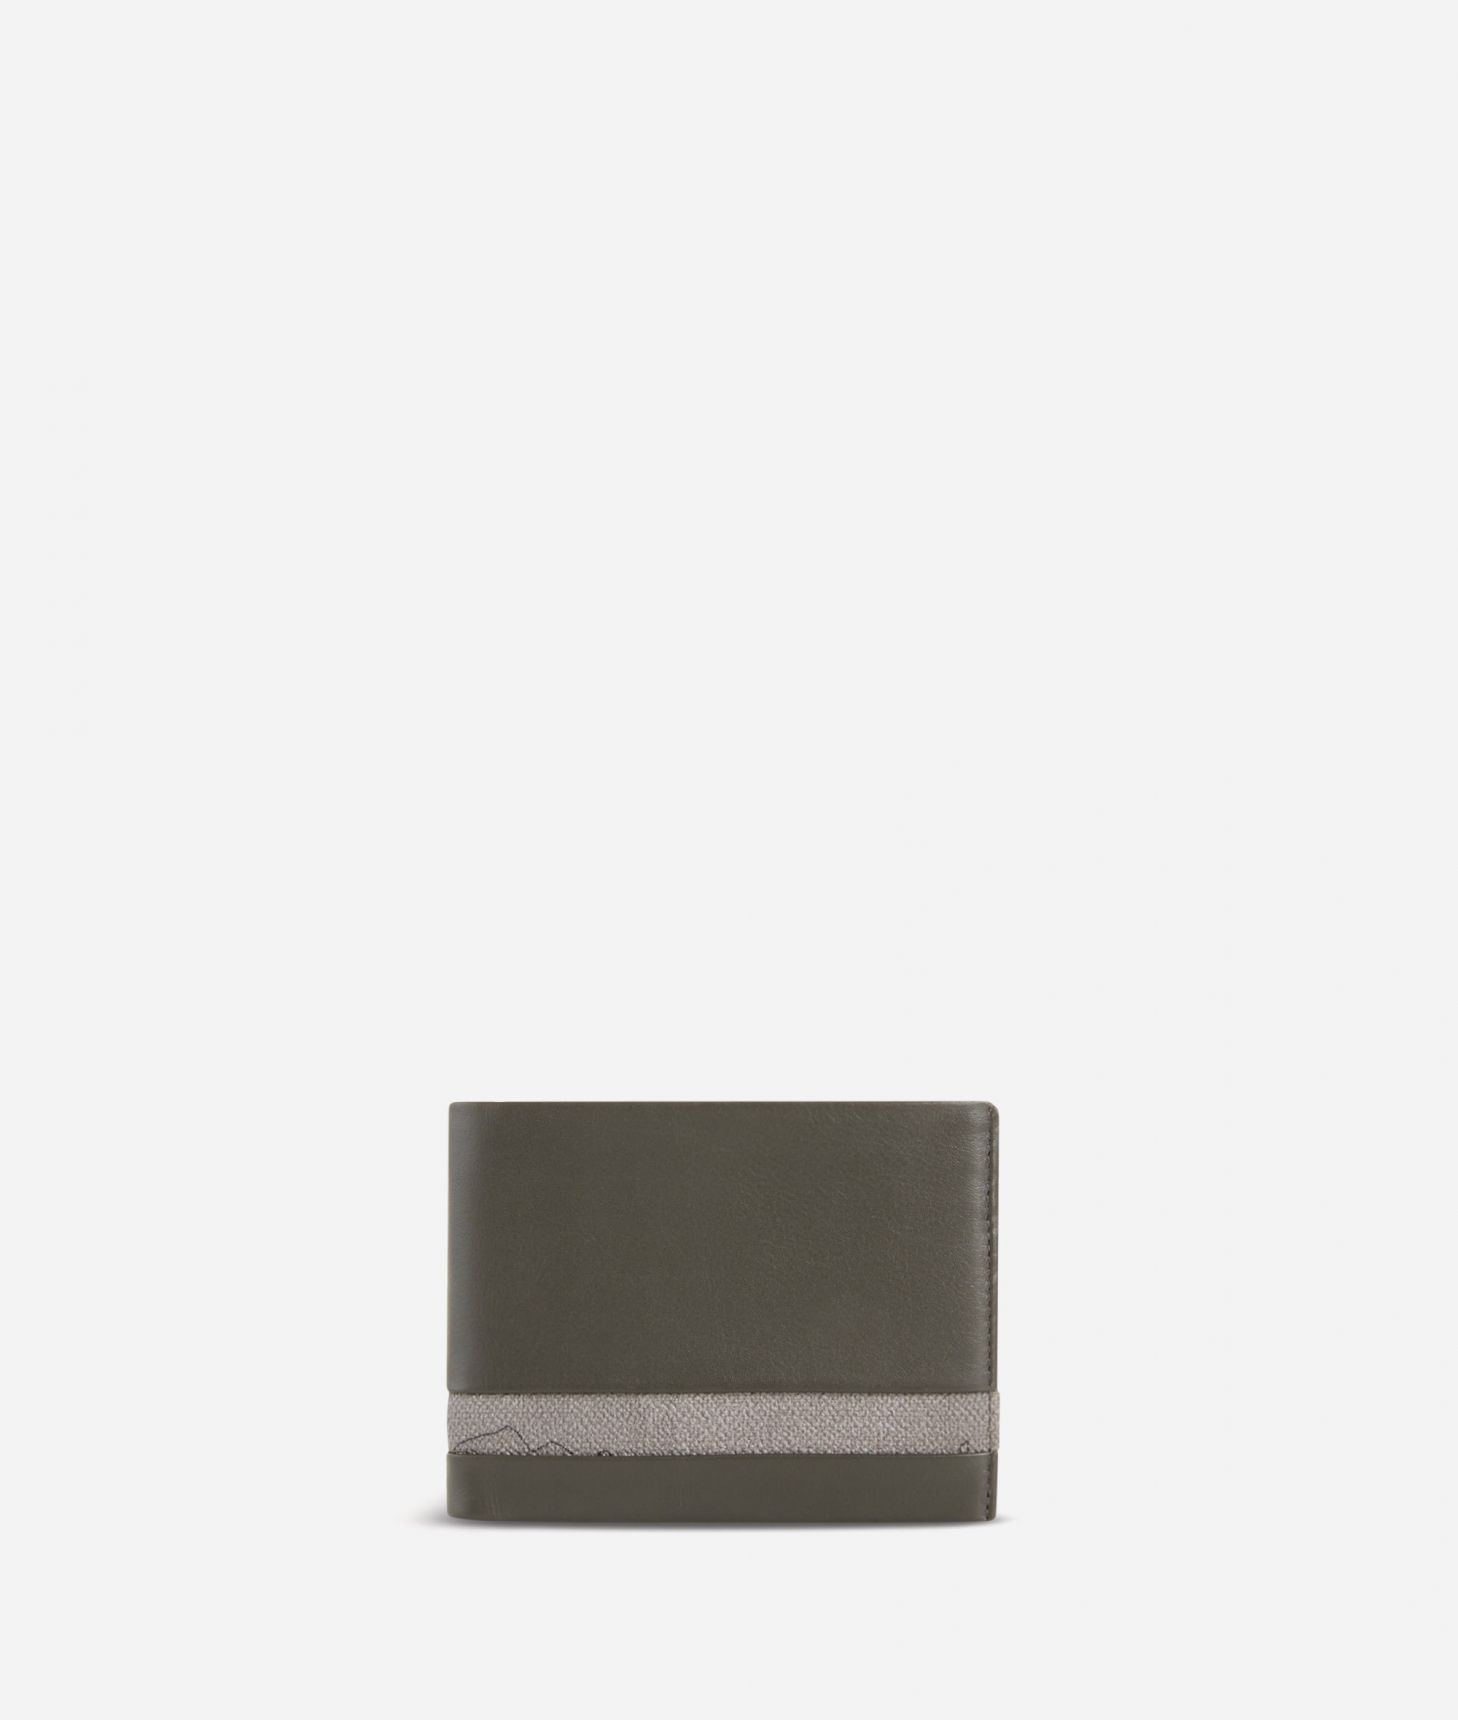 Small leather wallet Geo Dark fabric trims,front